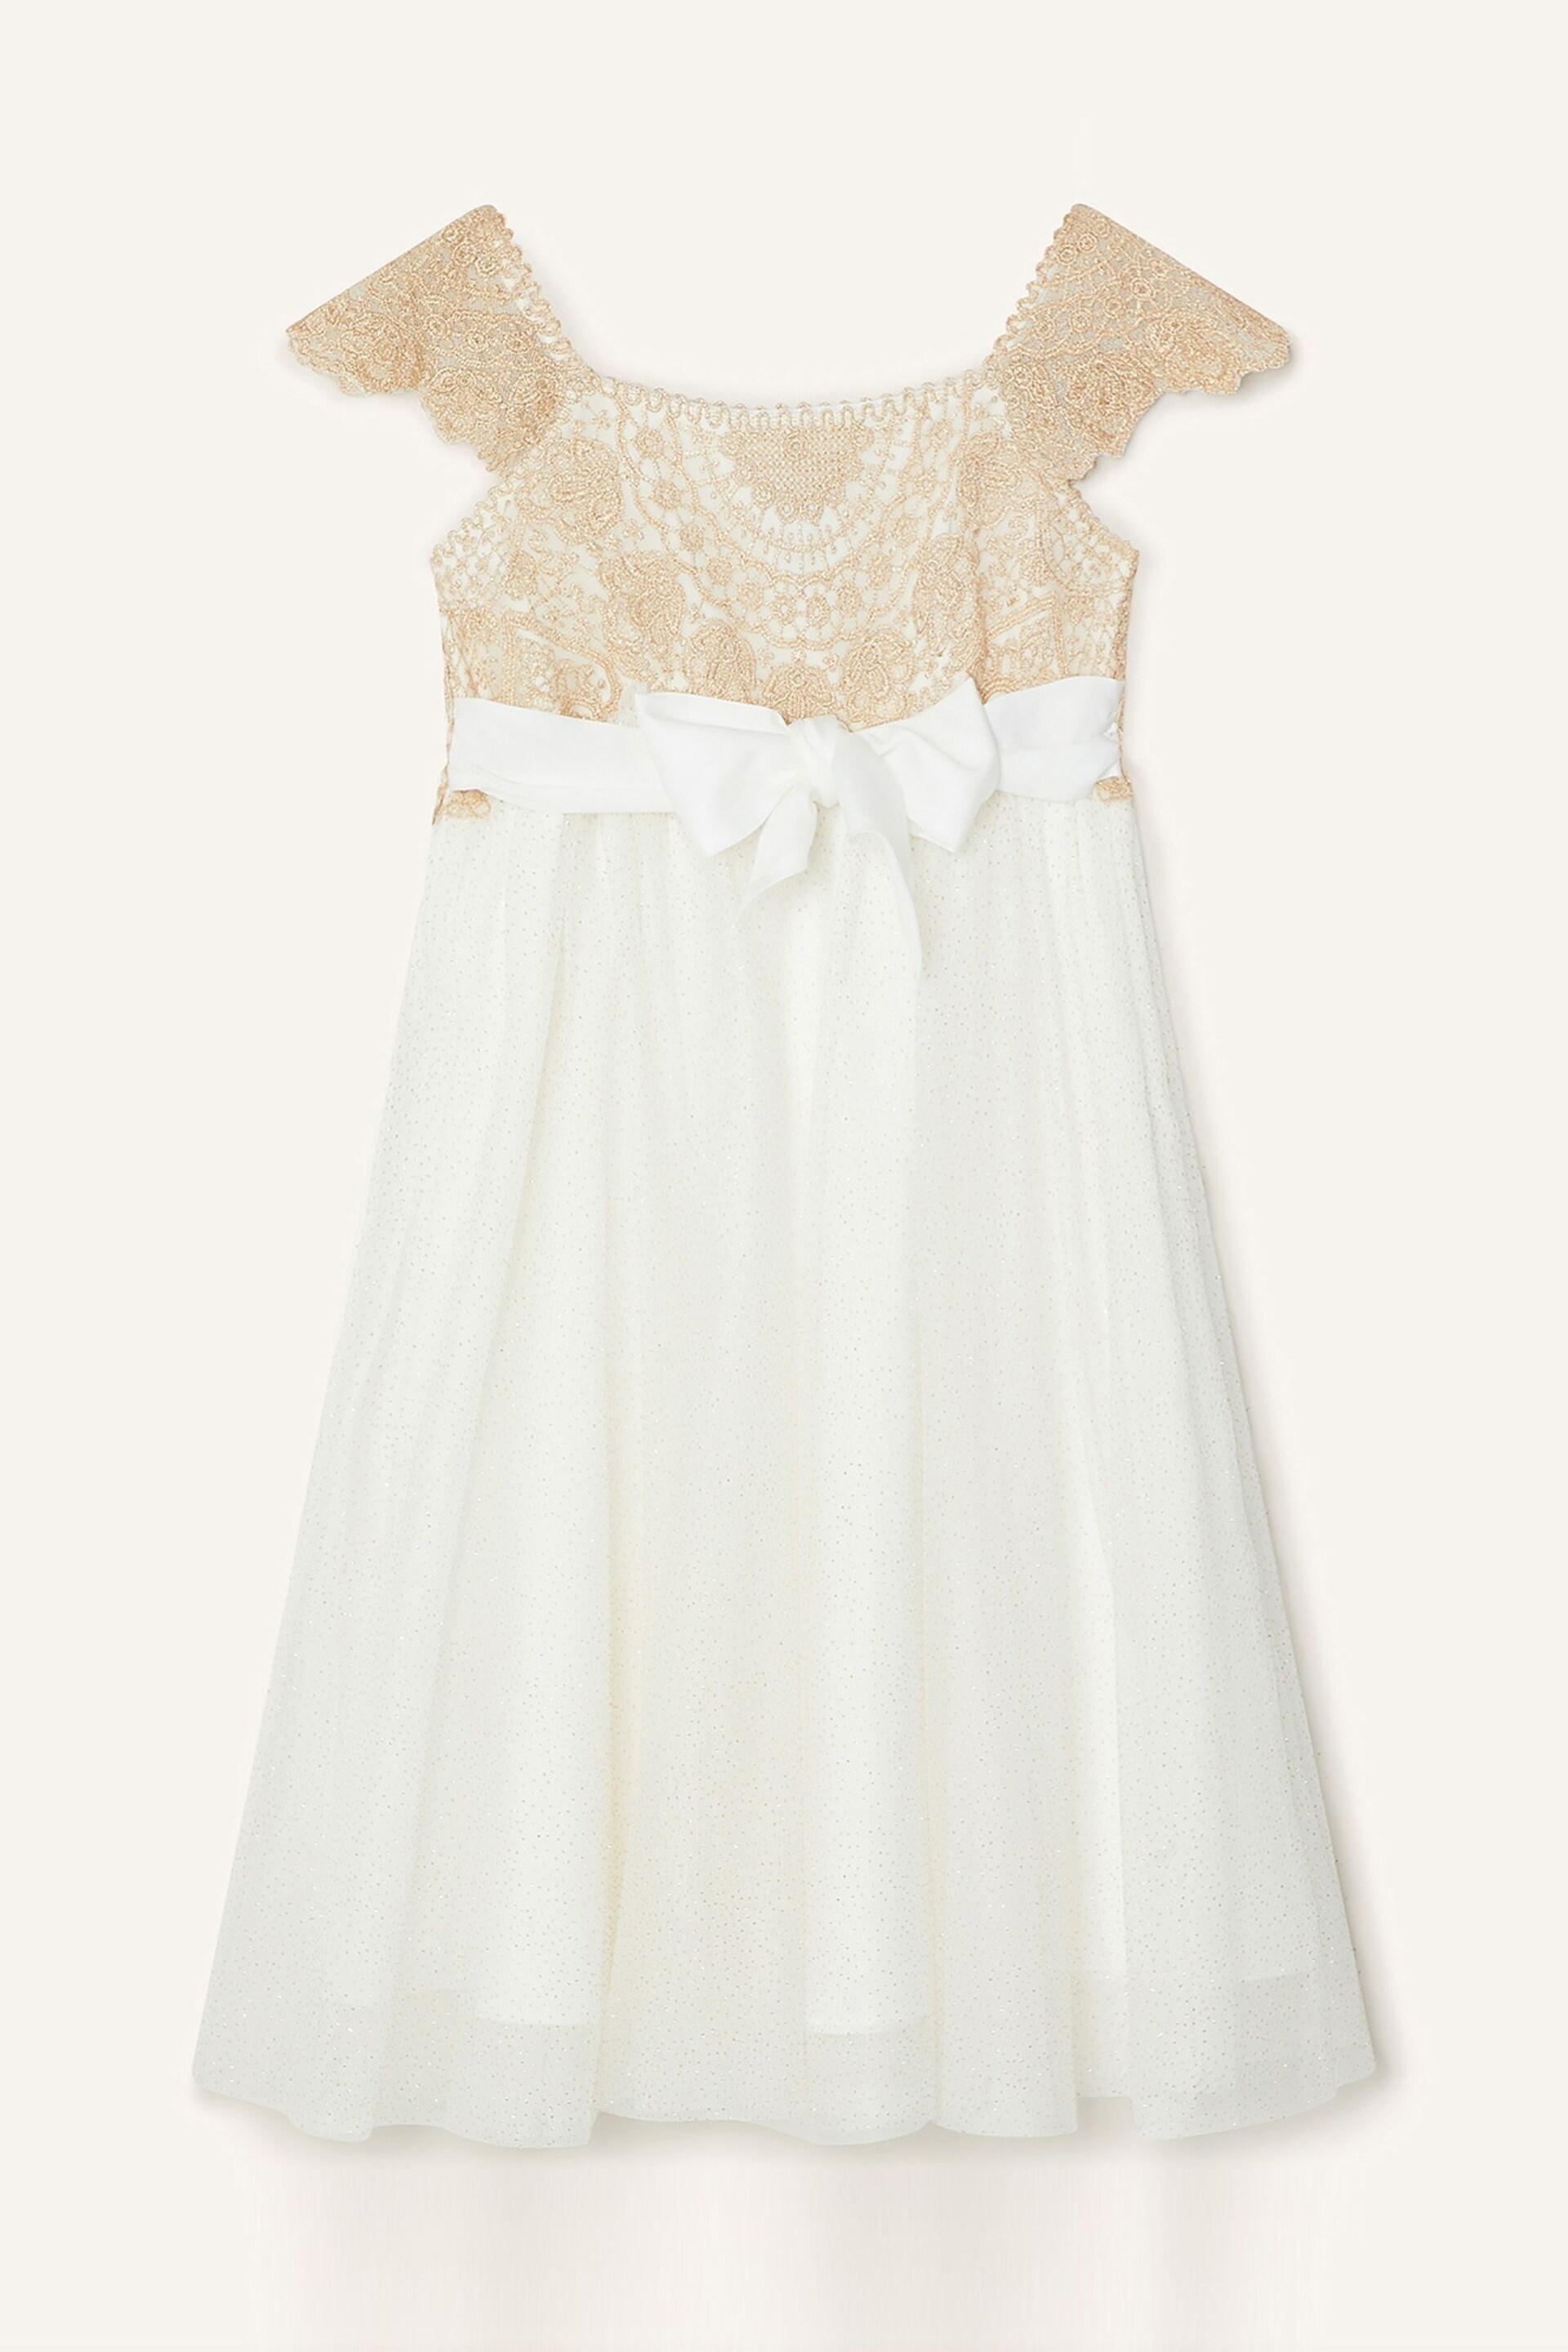 Monsoon Gold Estella Embroidered Dress - Image 2 of 3